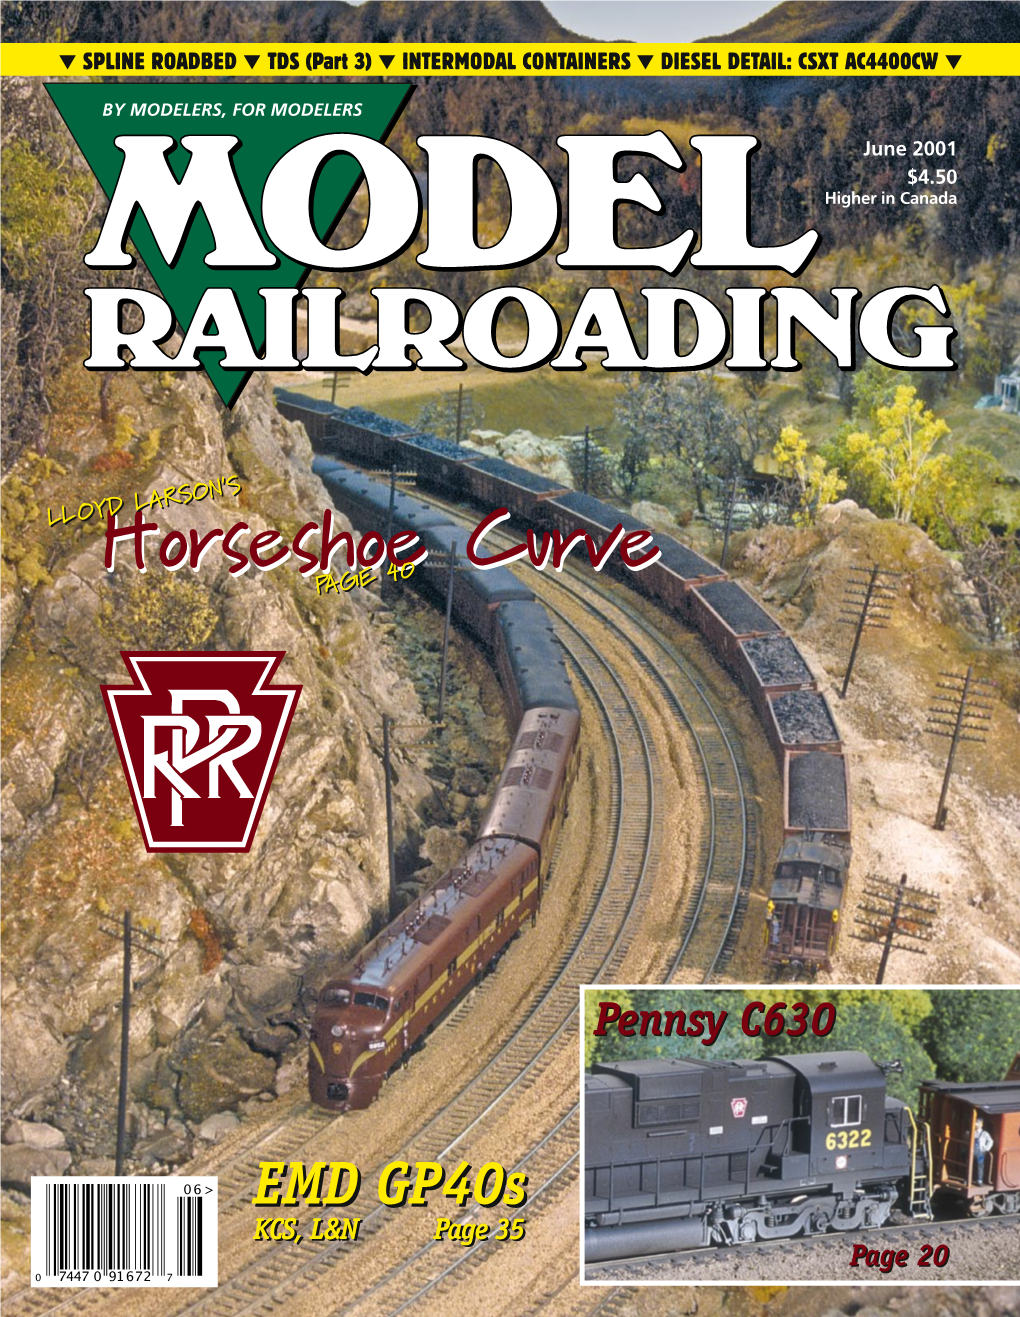 2001 MODEL RAILROADING ▼ 5 �J' Quality Railroad Books from Withers Publishing ."